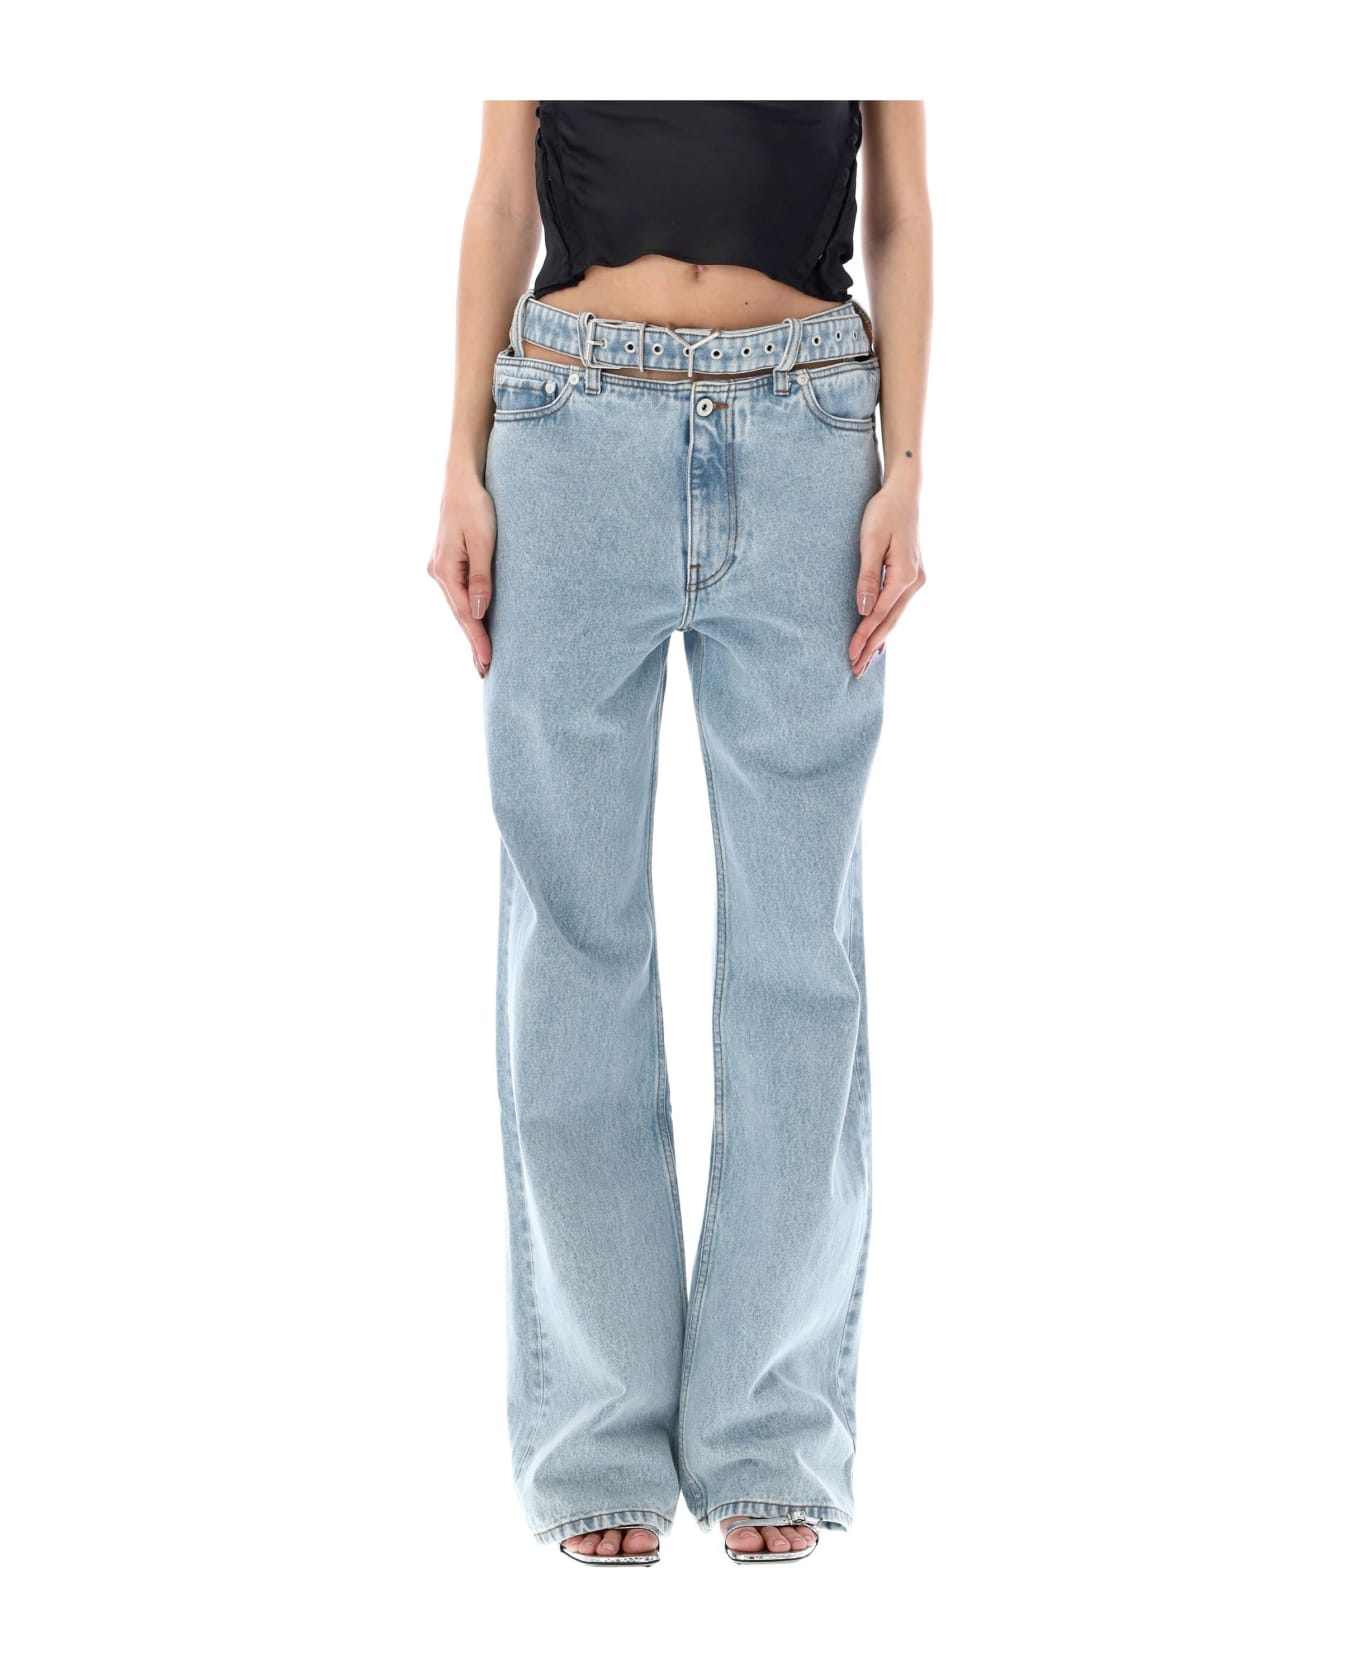 Y/Project Y Belt Jeans - EVERGREEN ICE BLUE